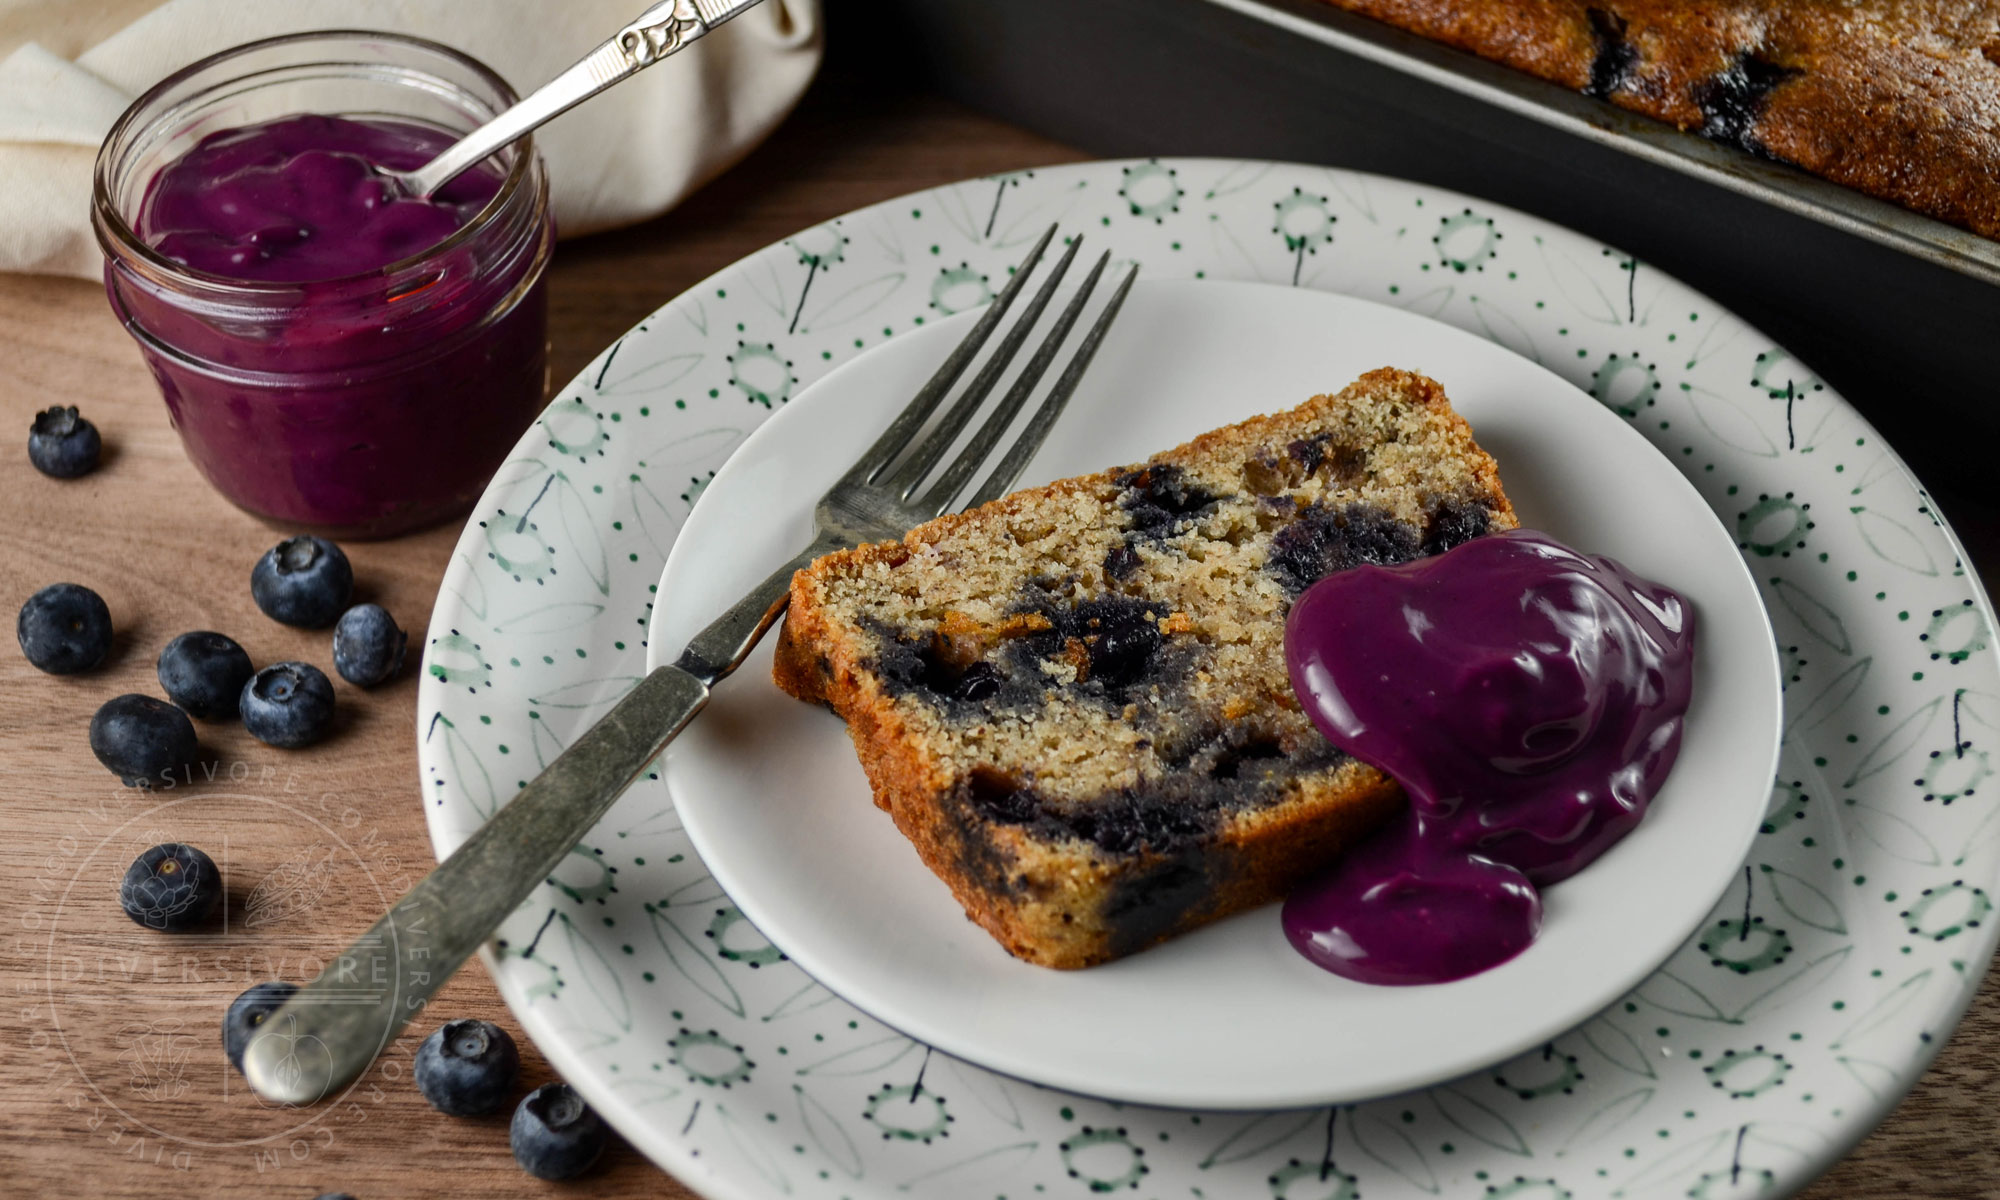 A slice of blueberry juniper rye cake on a white plate with an old fork, topped with blueberry-lemon curd